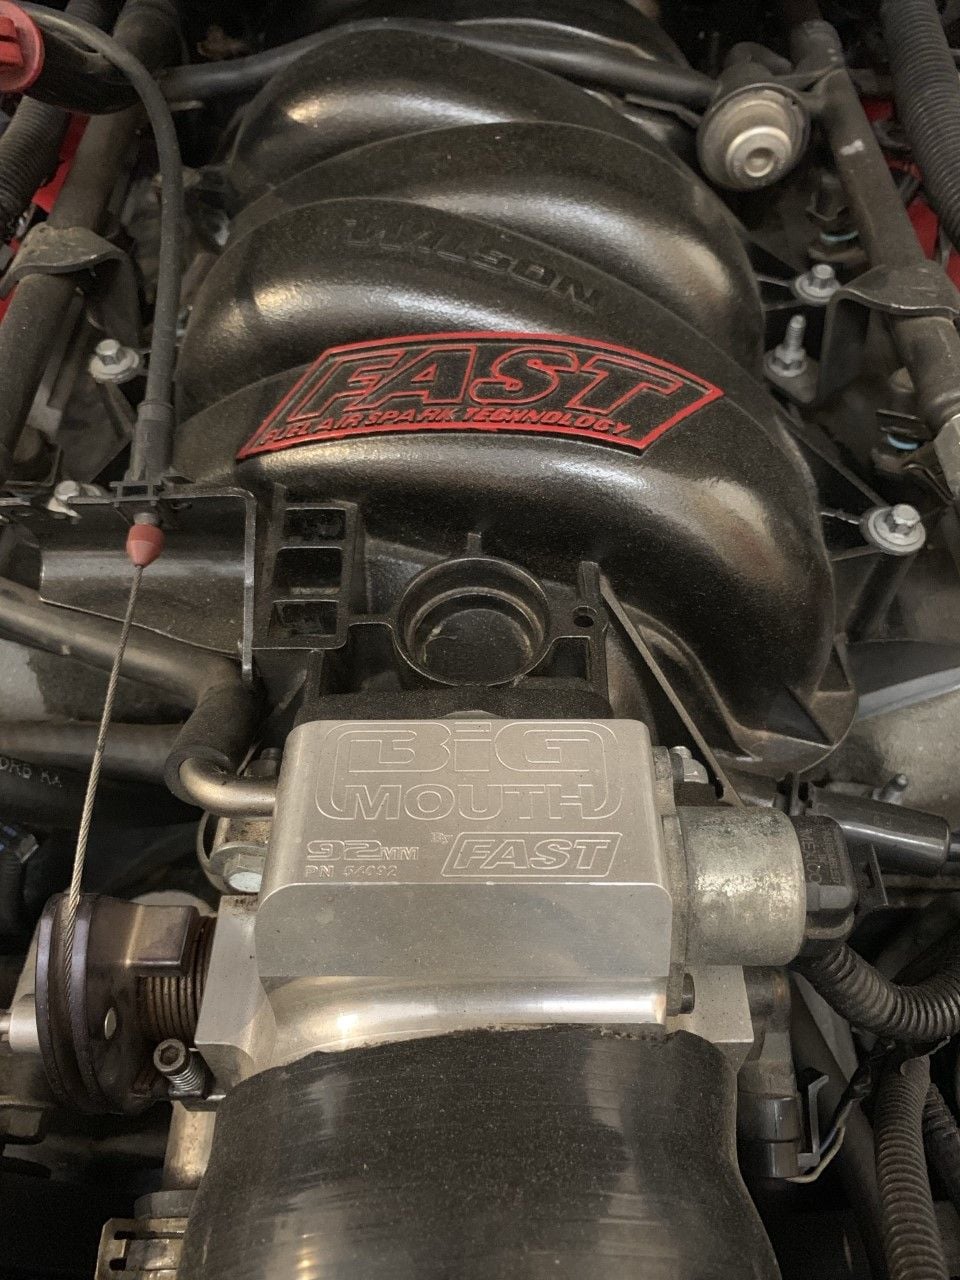  - Fast 90 Intake and Fast 92 Throttle Body - Dayton, OH 45424, United States